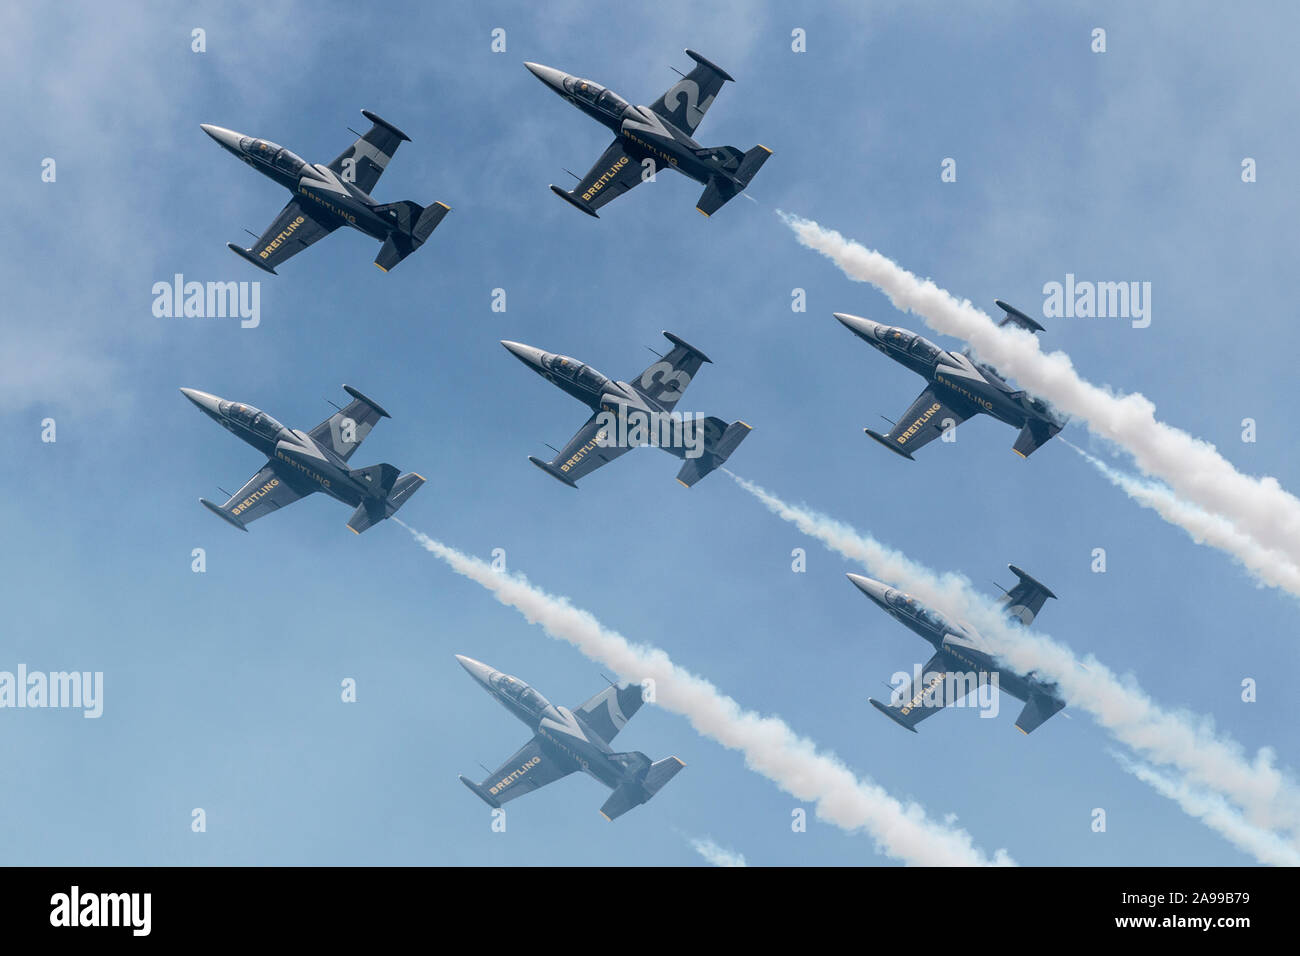 DAYTON, OHIO / USA - June 20, 2015: The French Breitling Jet Team performs at the 2015 Dayton Airshow, flying the  Czech Aero L-39 Albatros. Stock Photo